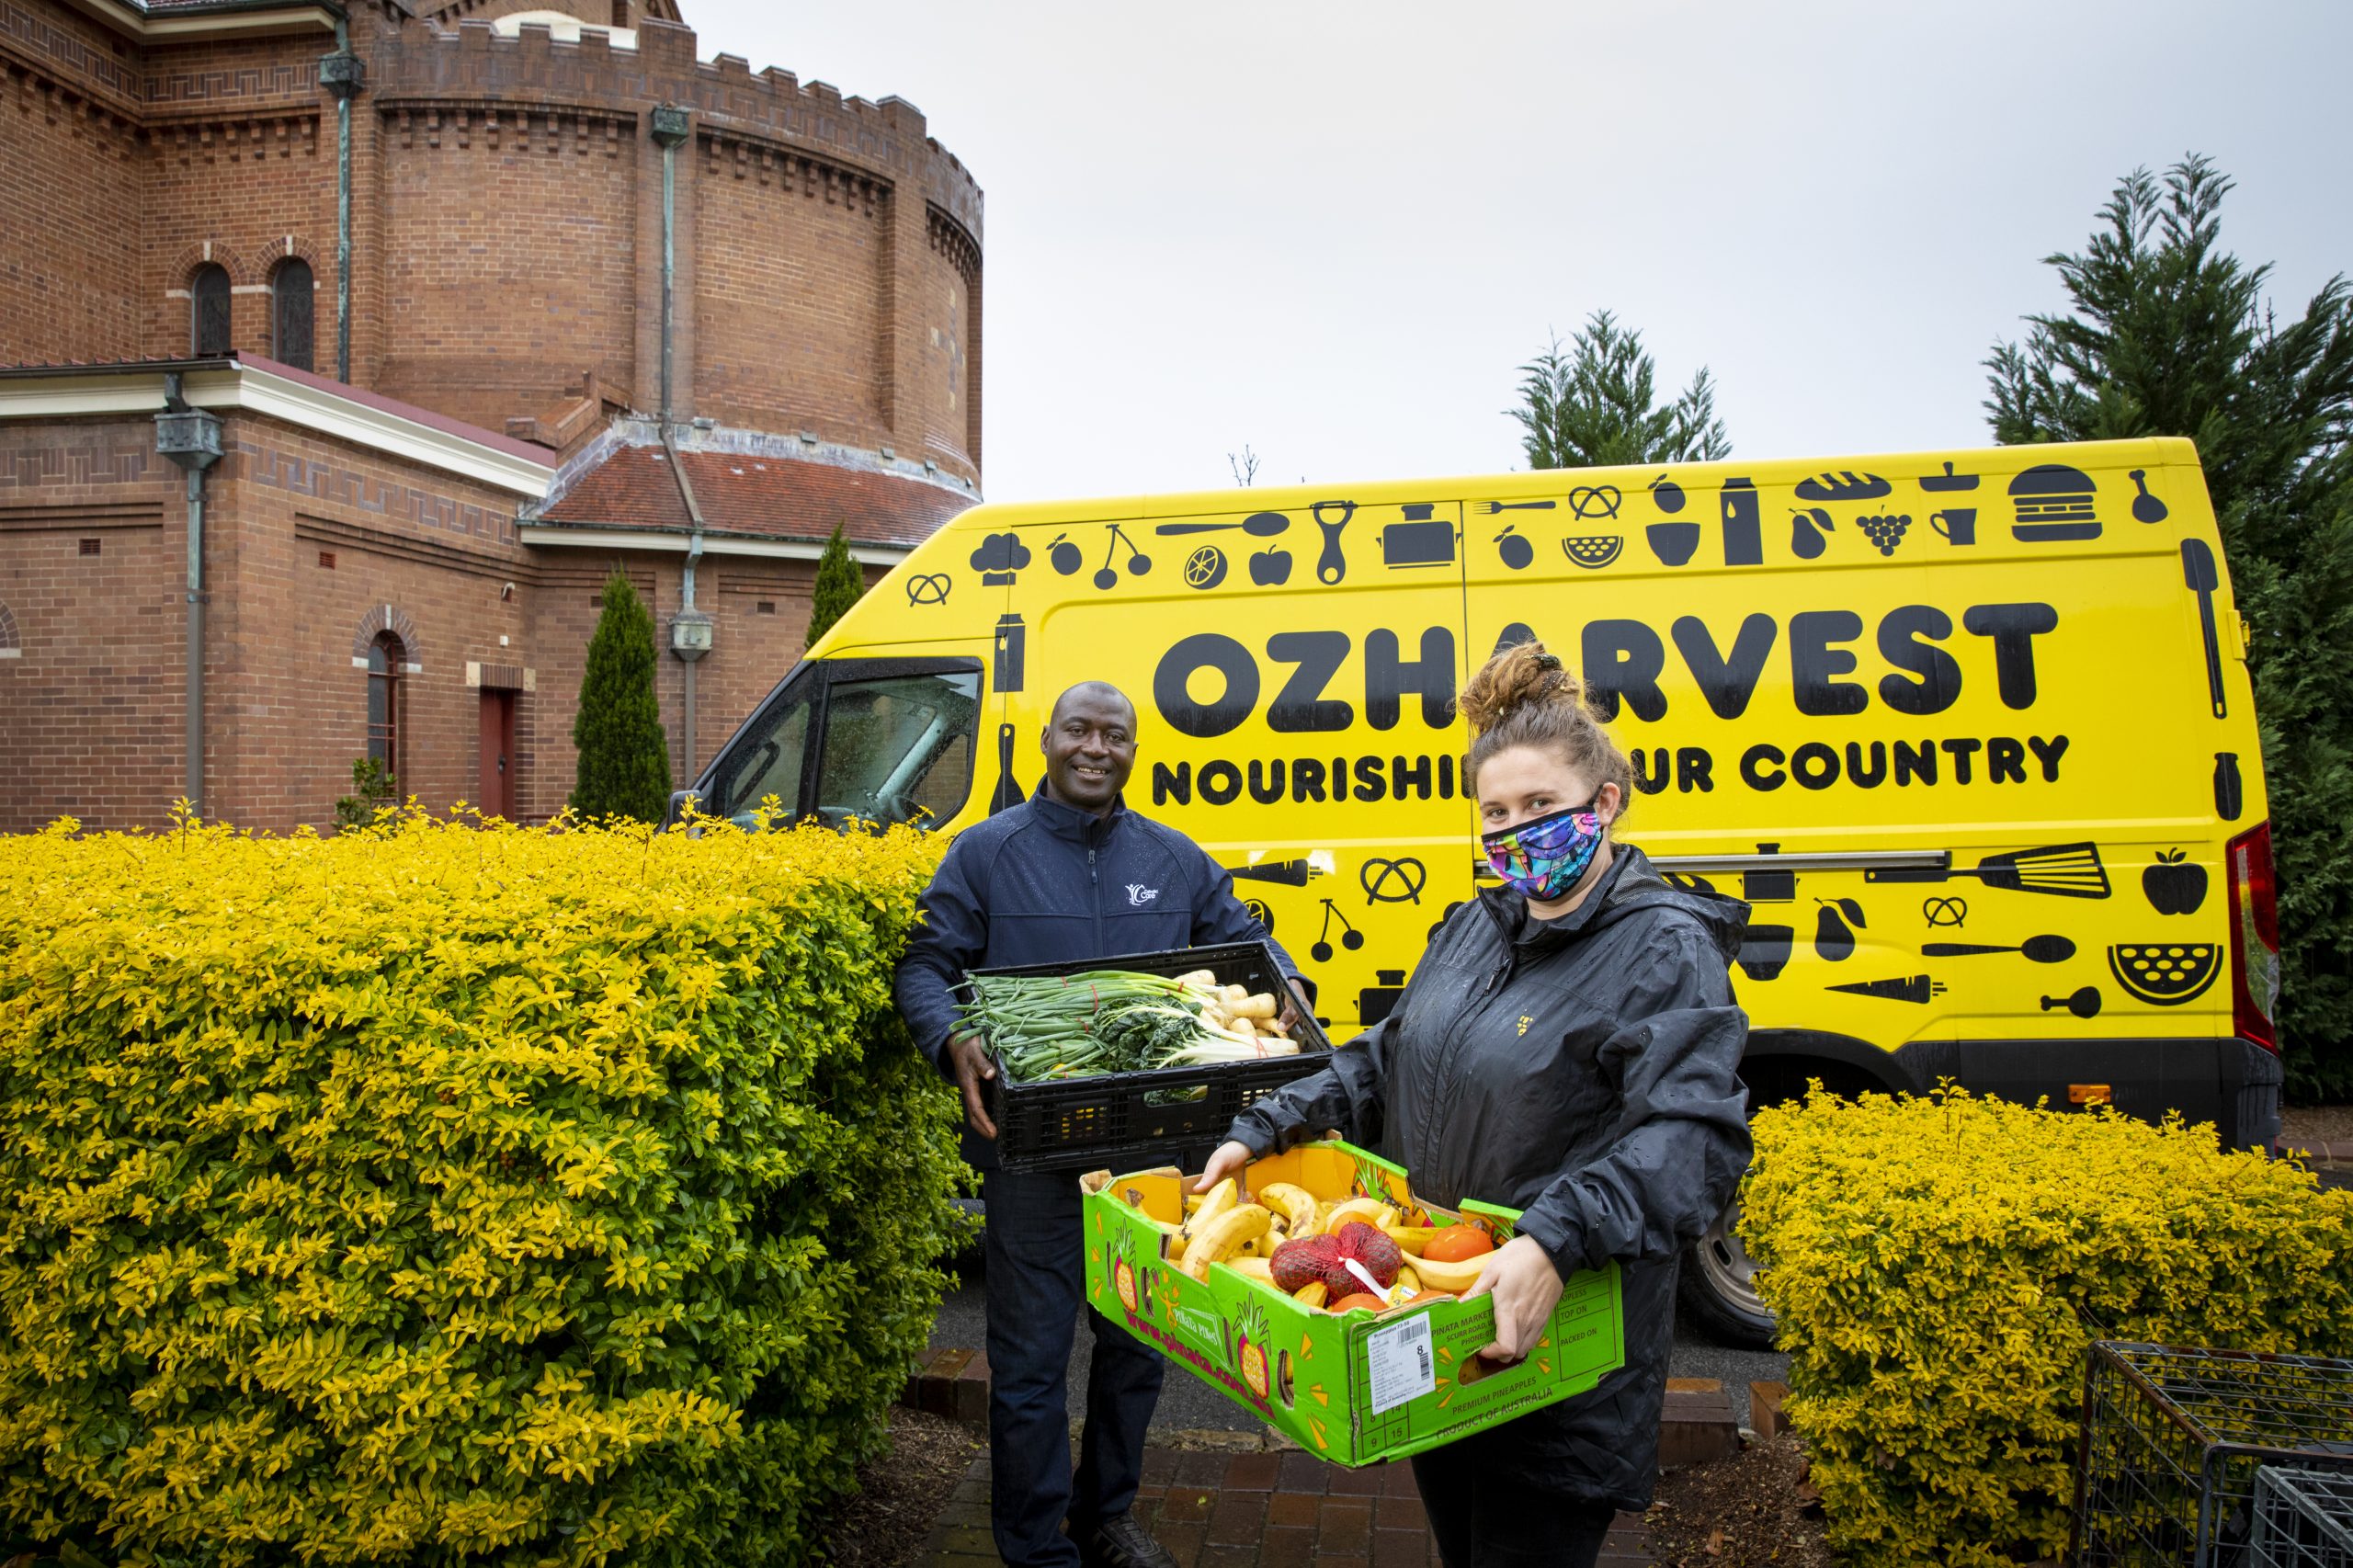 ozharvest-newcastle-delivers-to-charity-dara-scaled-1670934096.jpeg